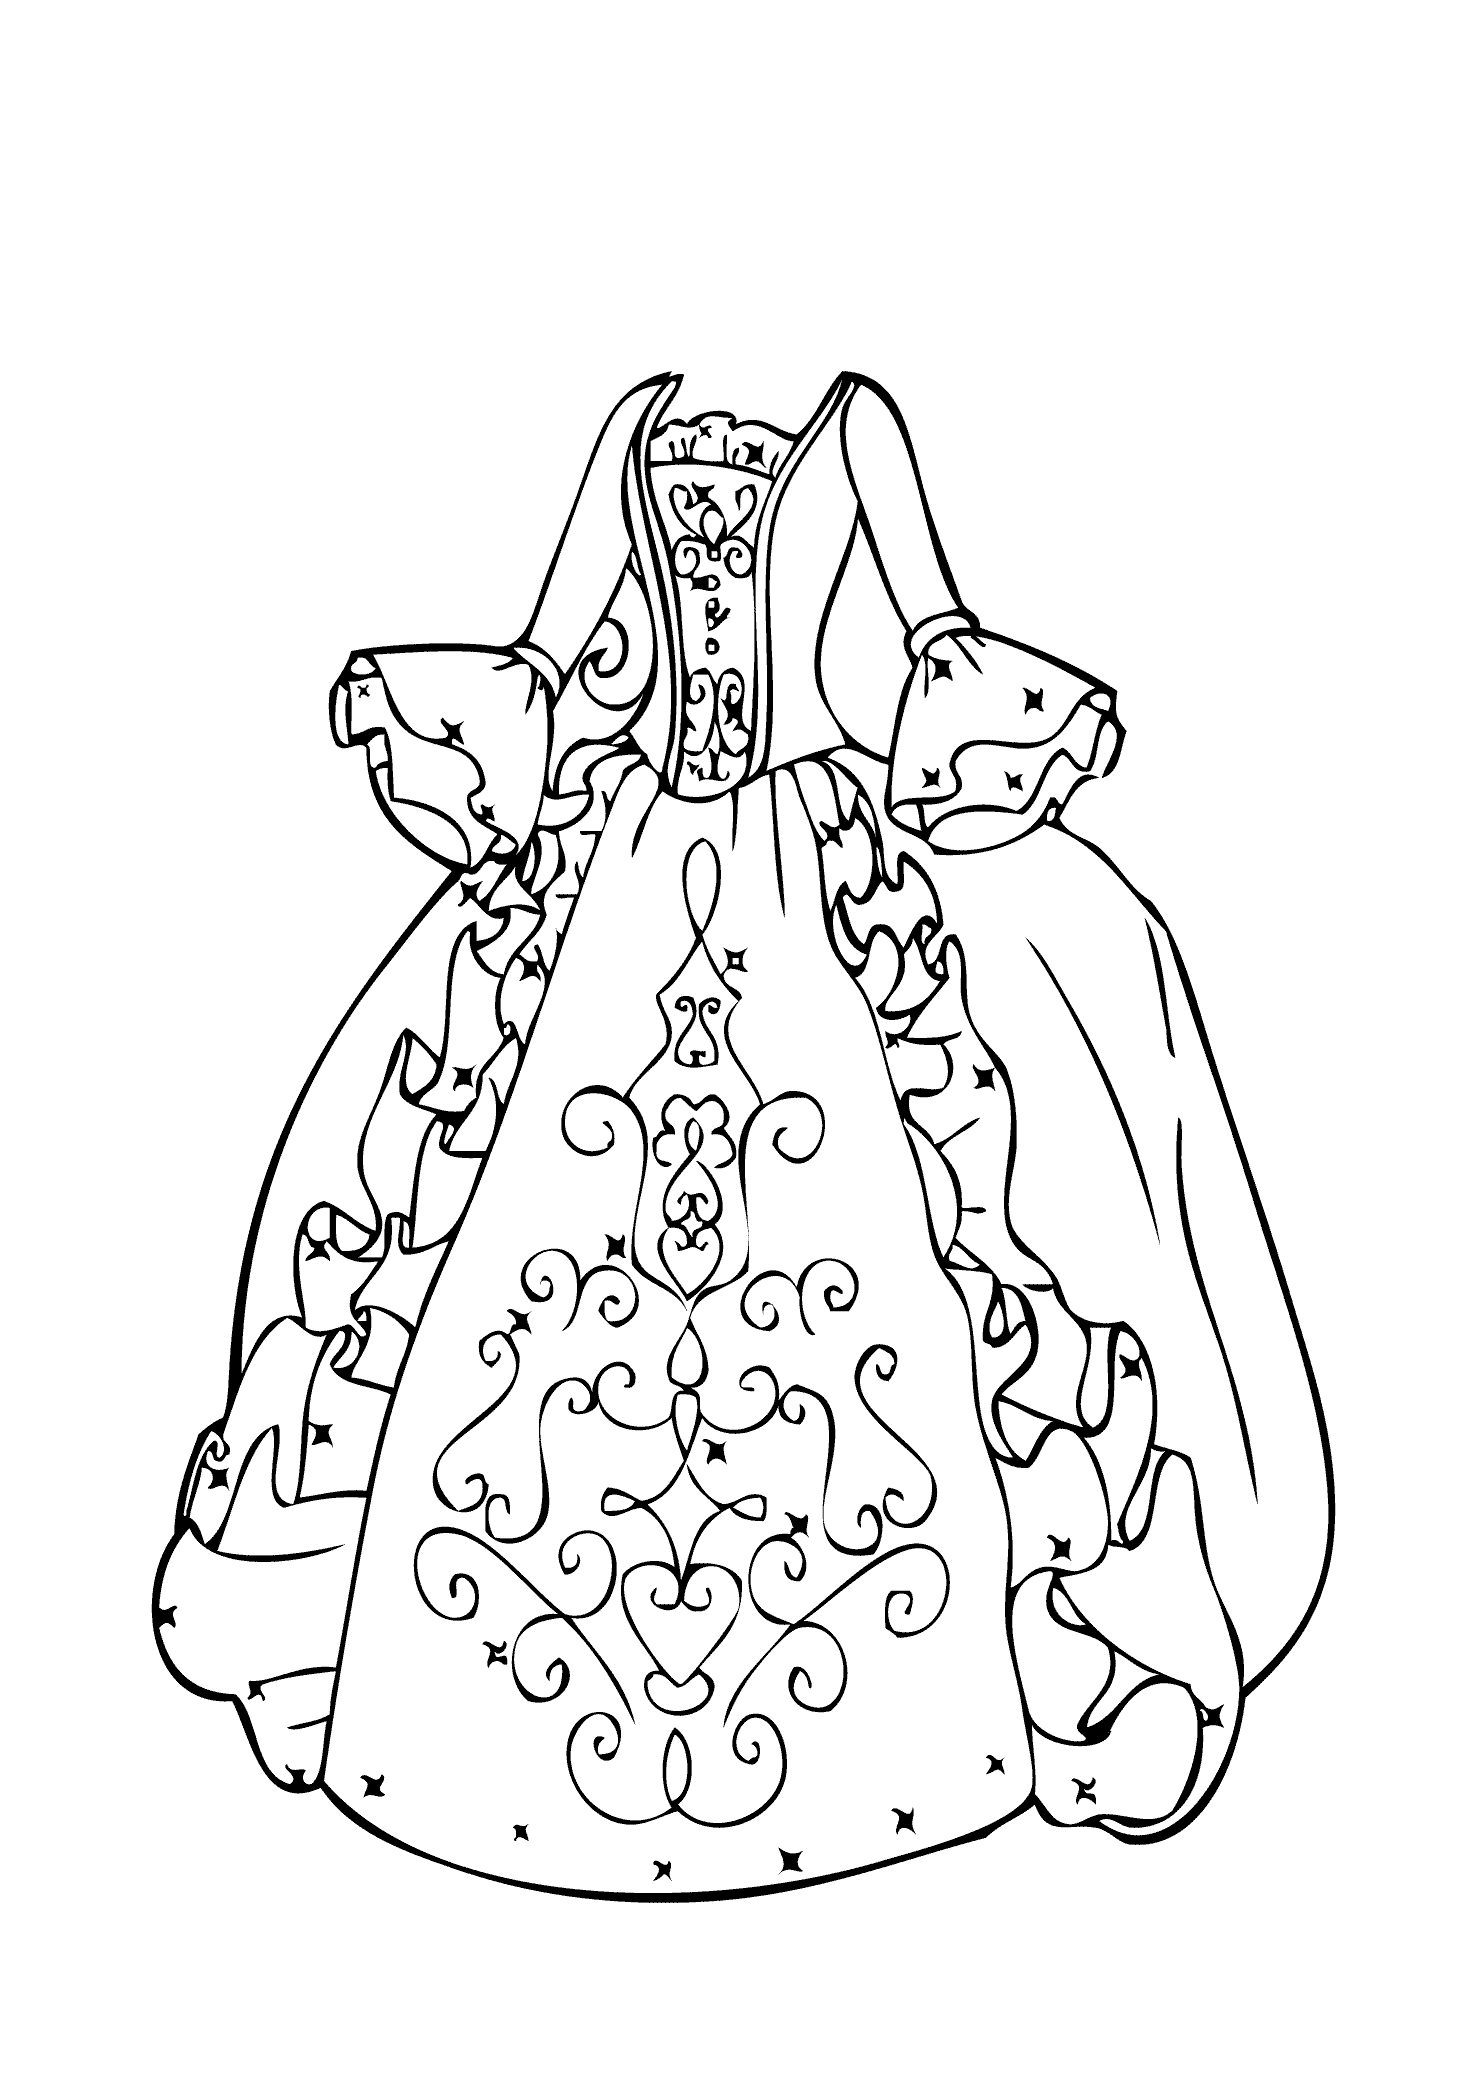 dresses coloring pages dress coloring pages bestofcoloringcom coloring pages dresses 